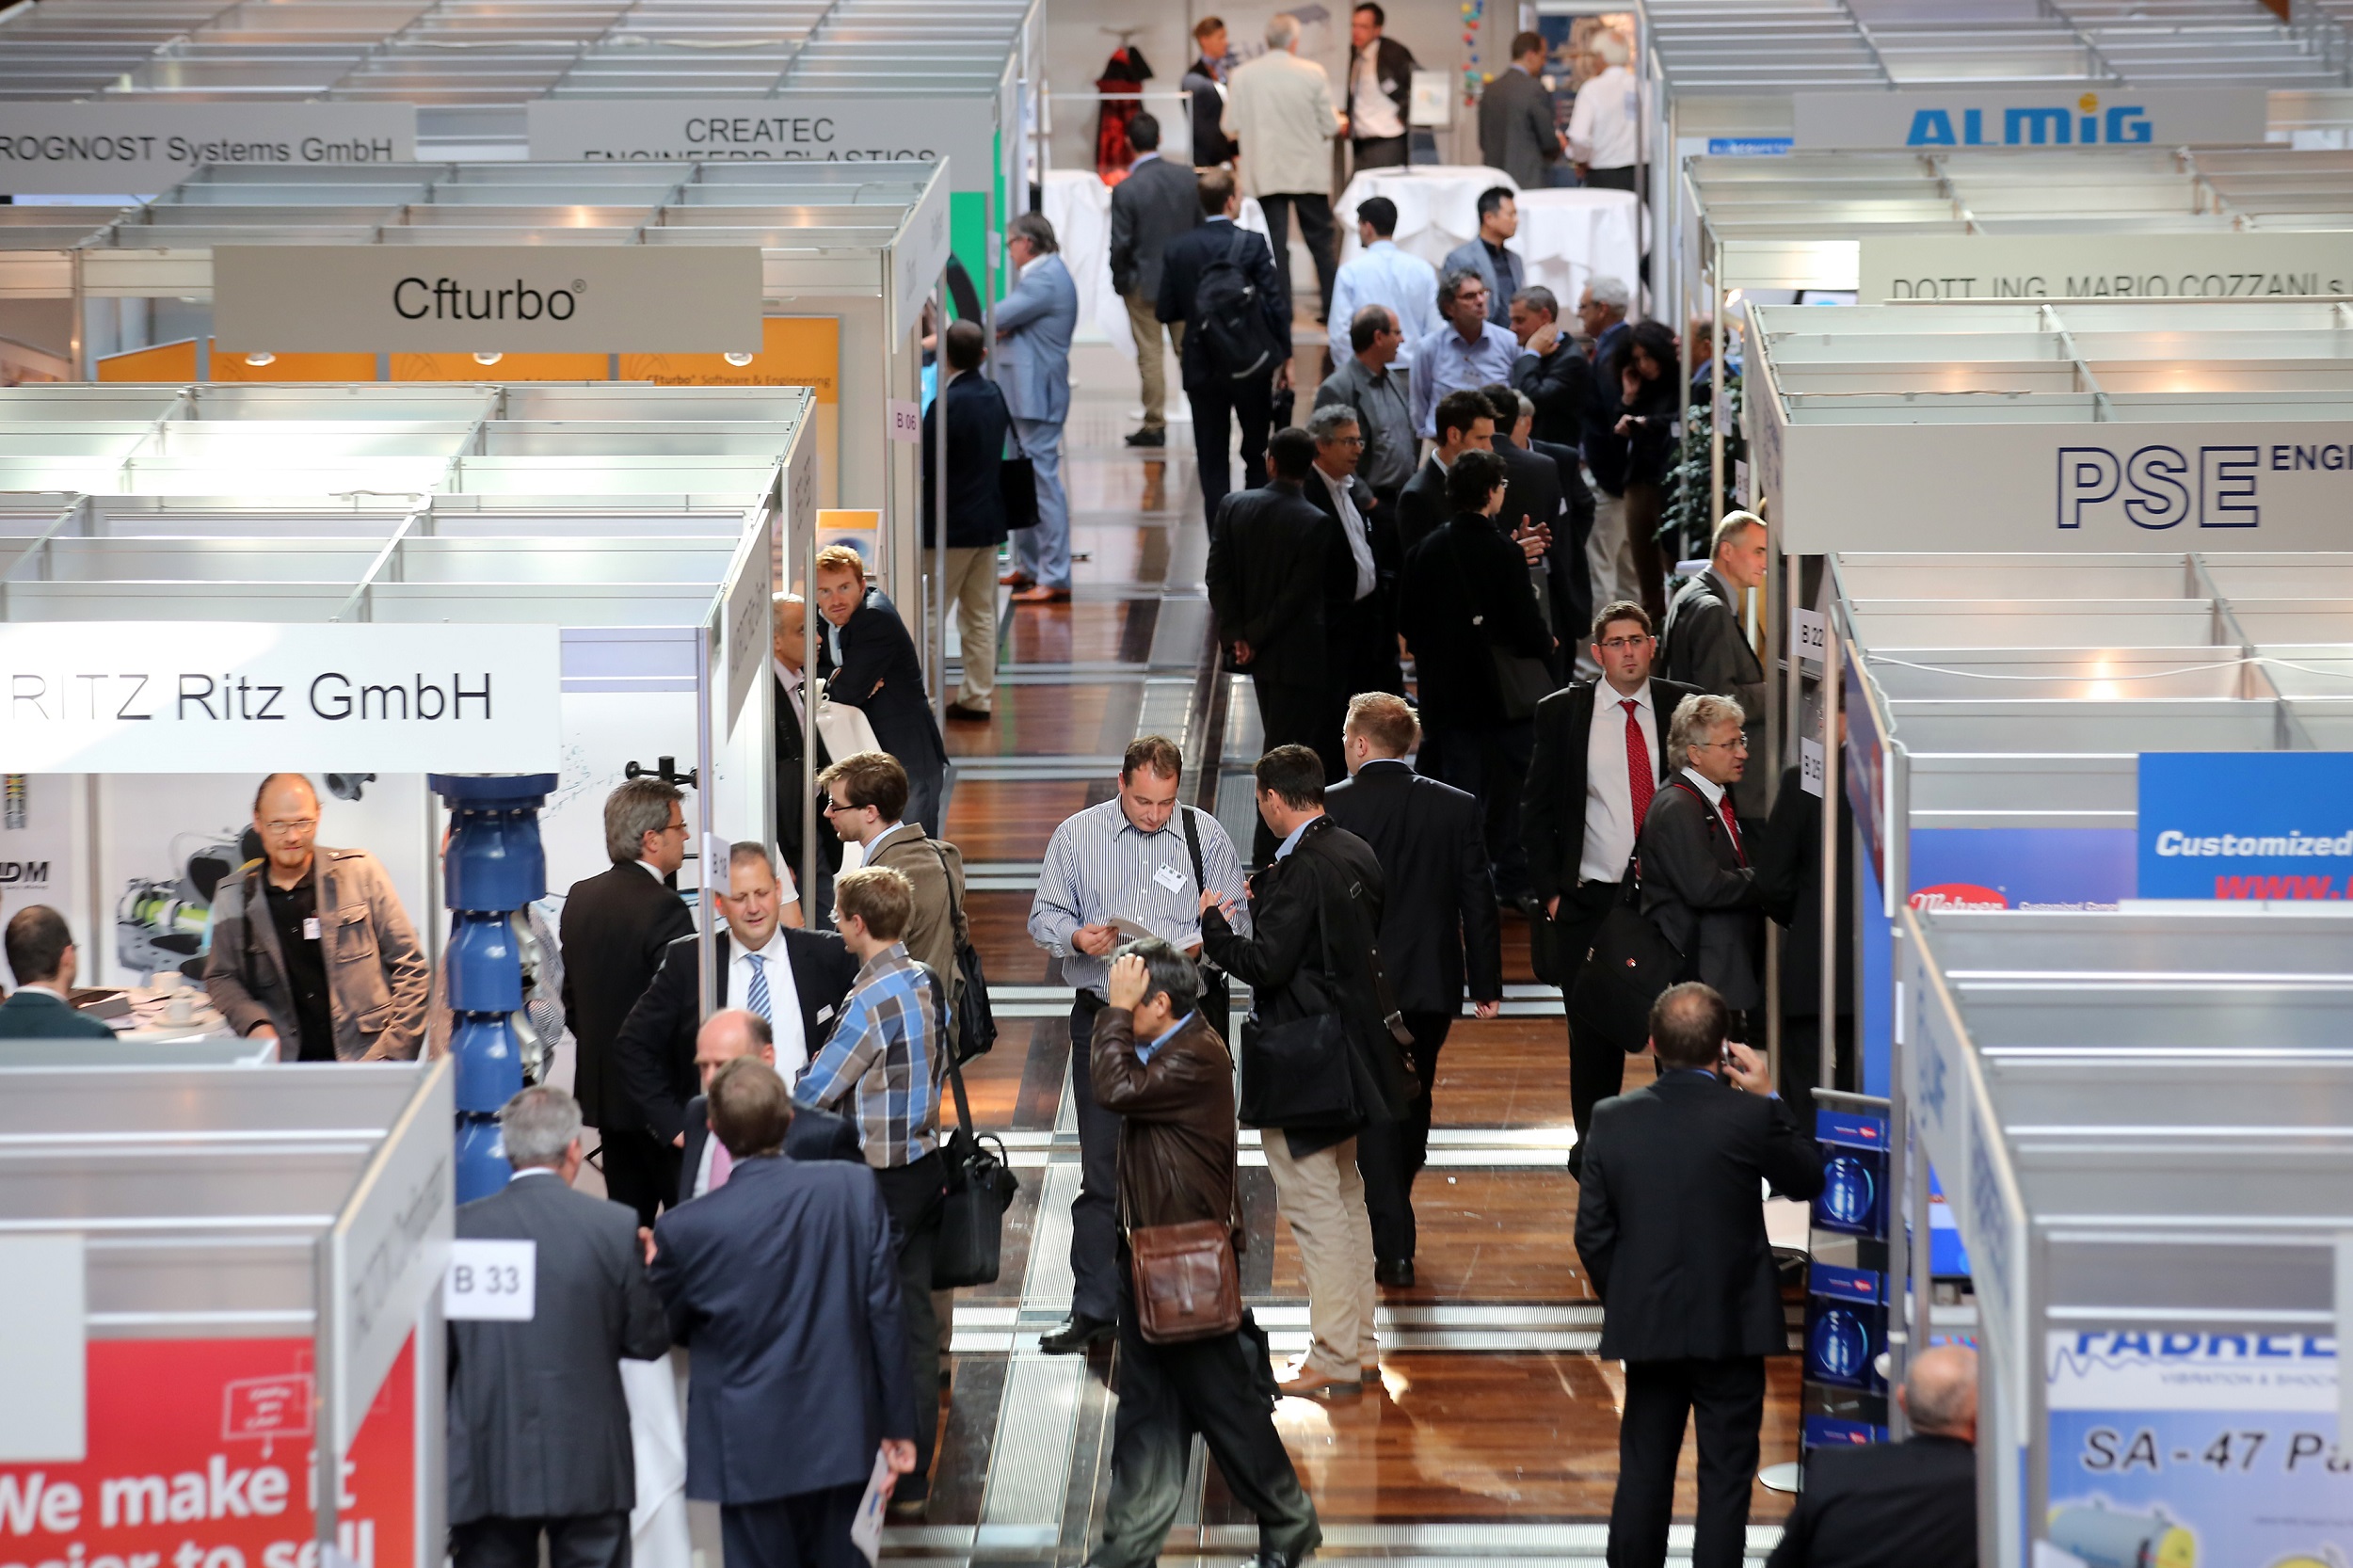 Visitors at the last VDMA International Rotating Equipment Conference in 2016.